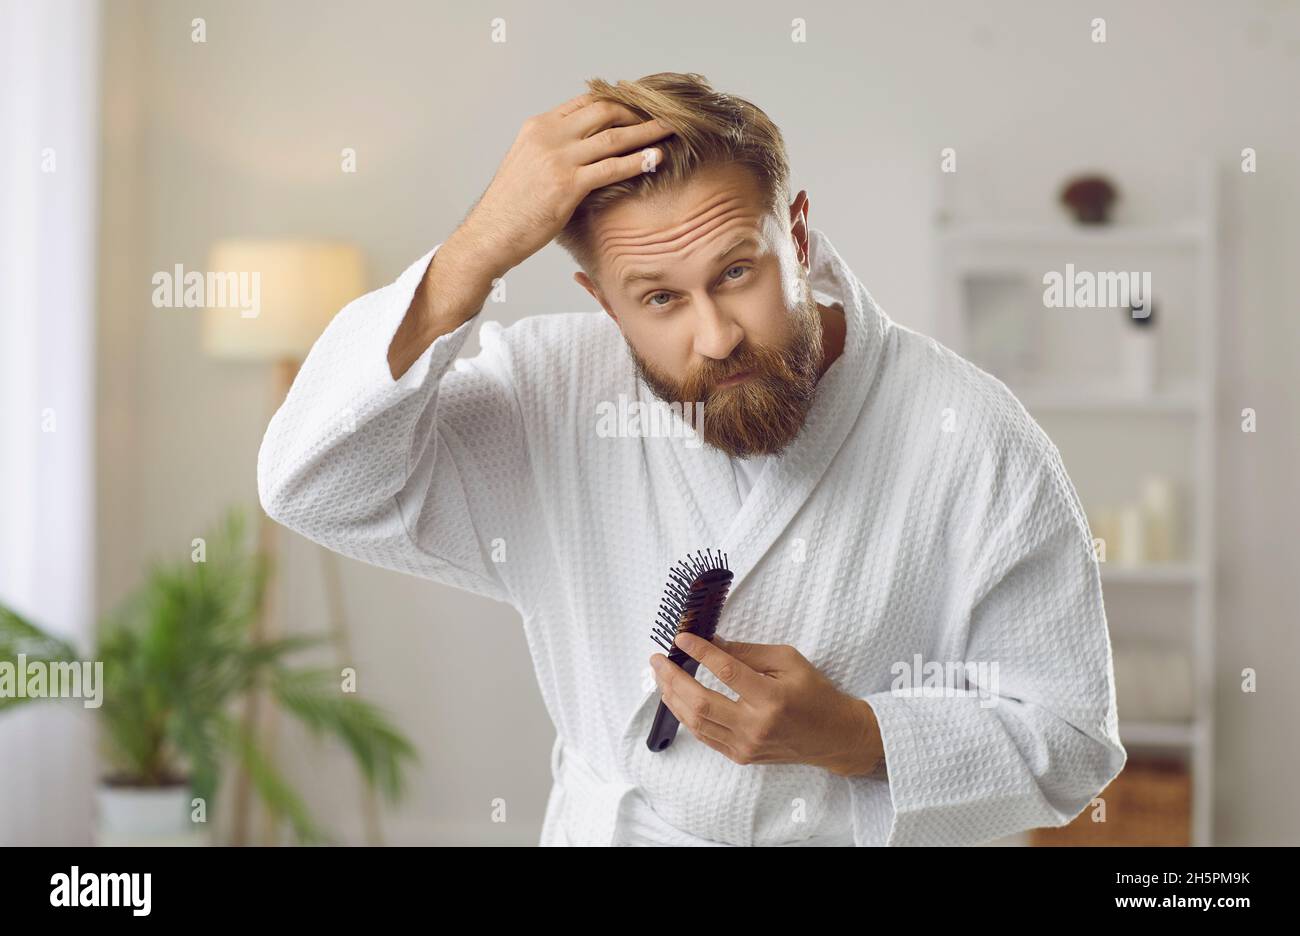 Handsome man concerned with problem of hair loss looking in mirror in his bathroom Stock Photo